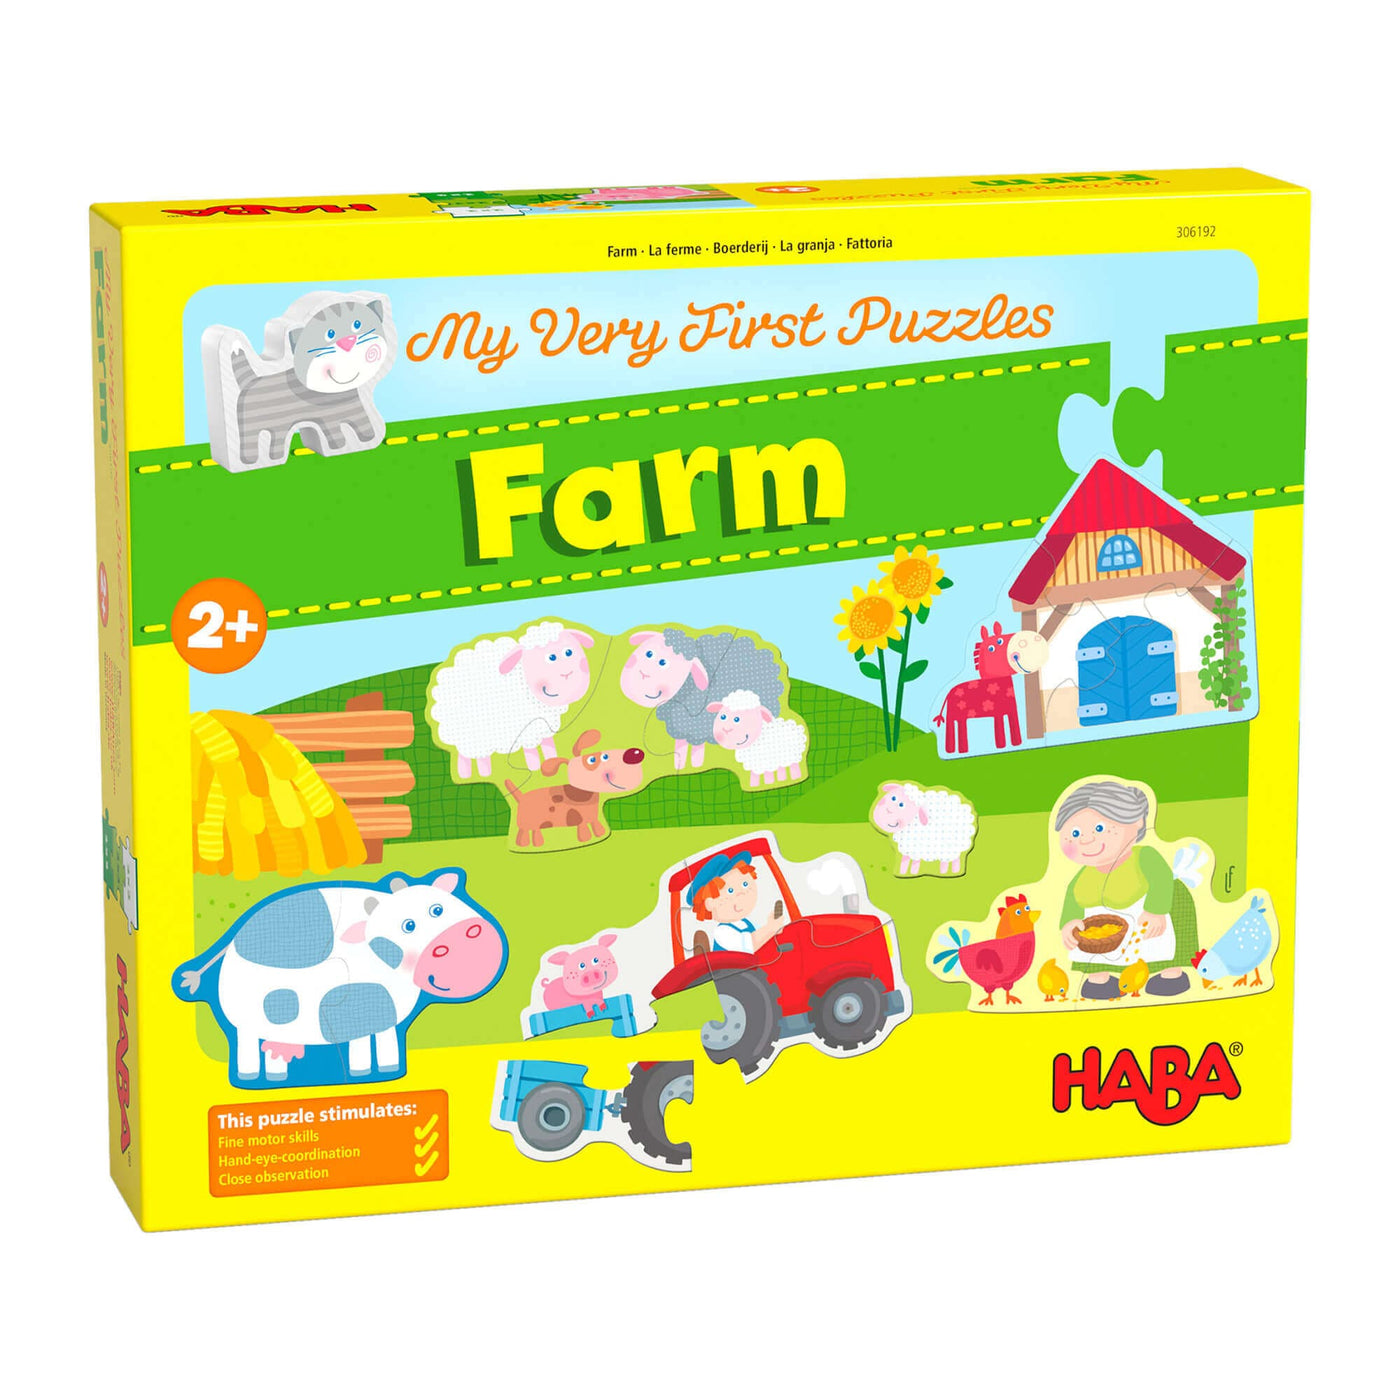 My Very First Puzzles - Farm by HABA